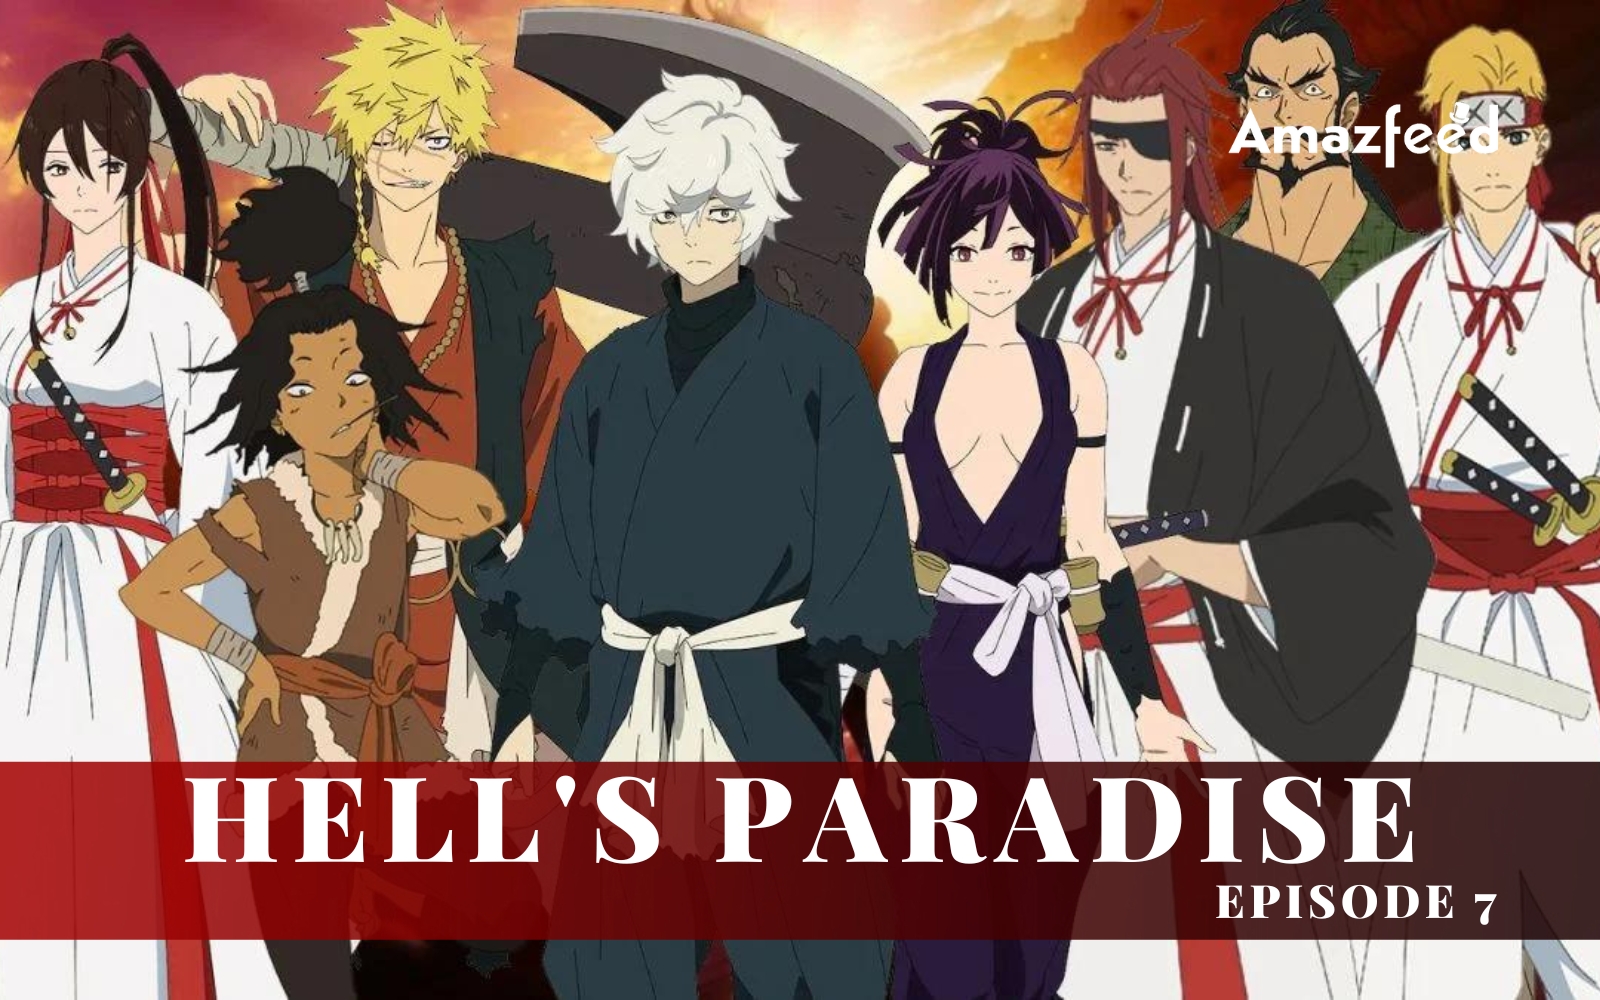 Hell's Paradise Episode 2 Release Date and Spoilers: When Does it Come Out?